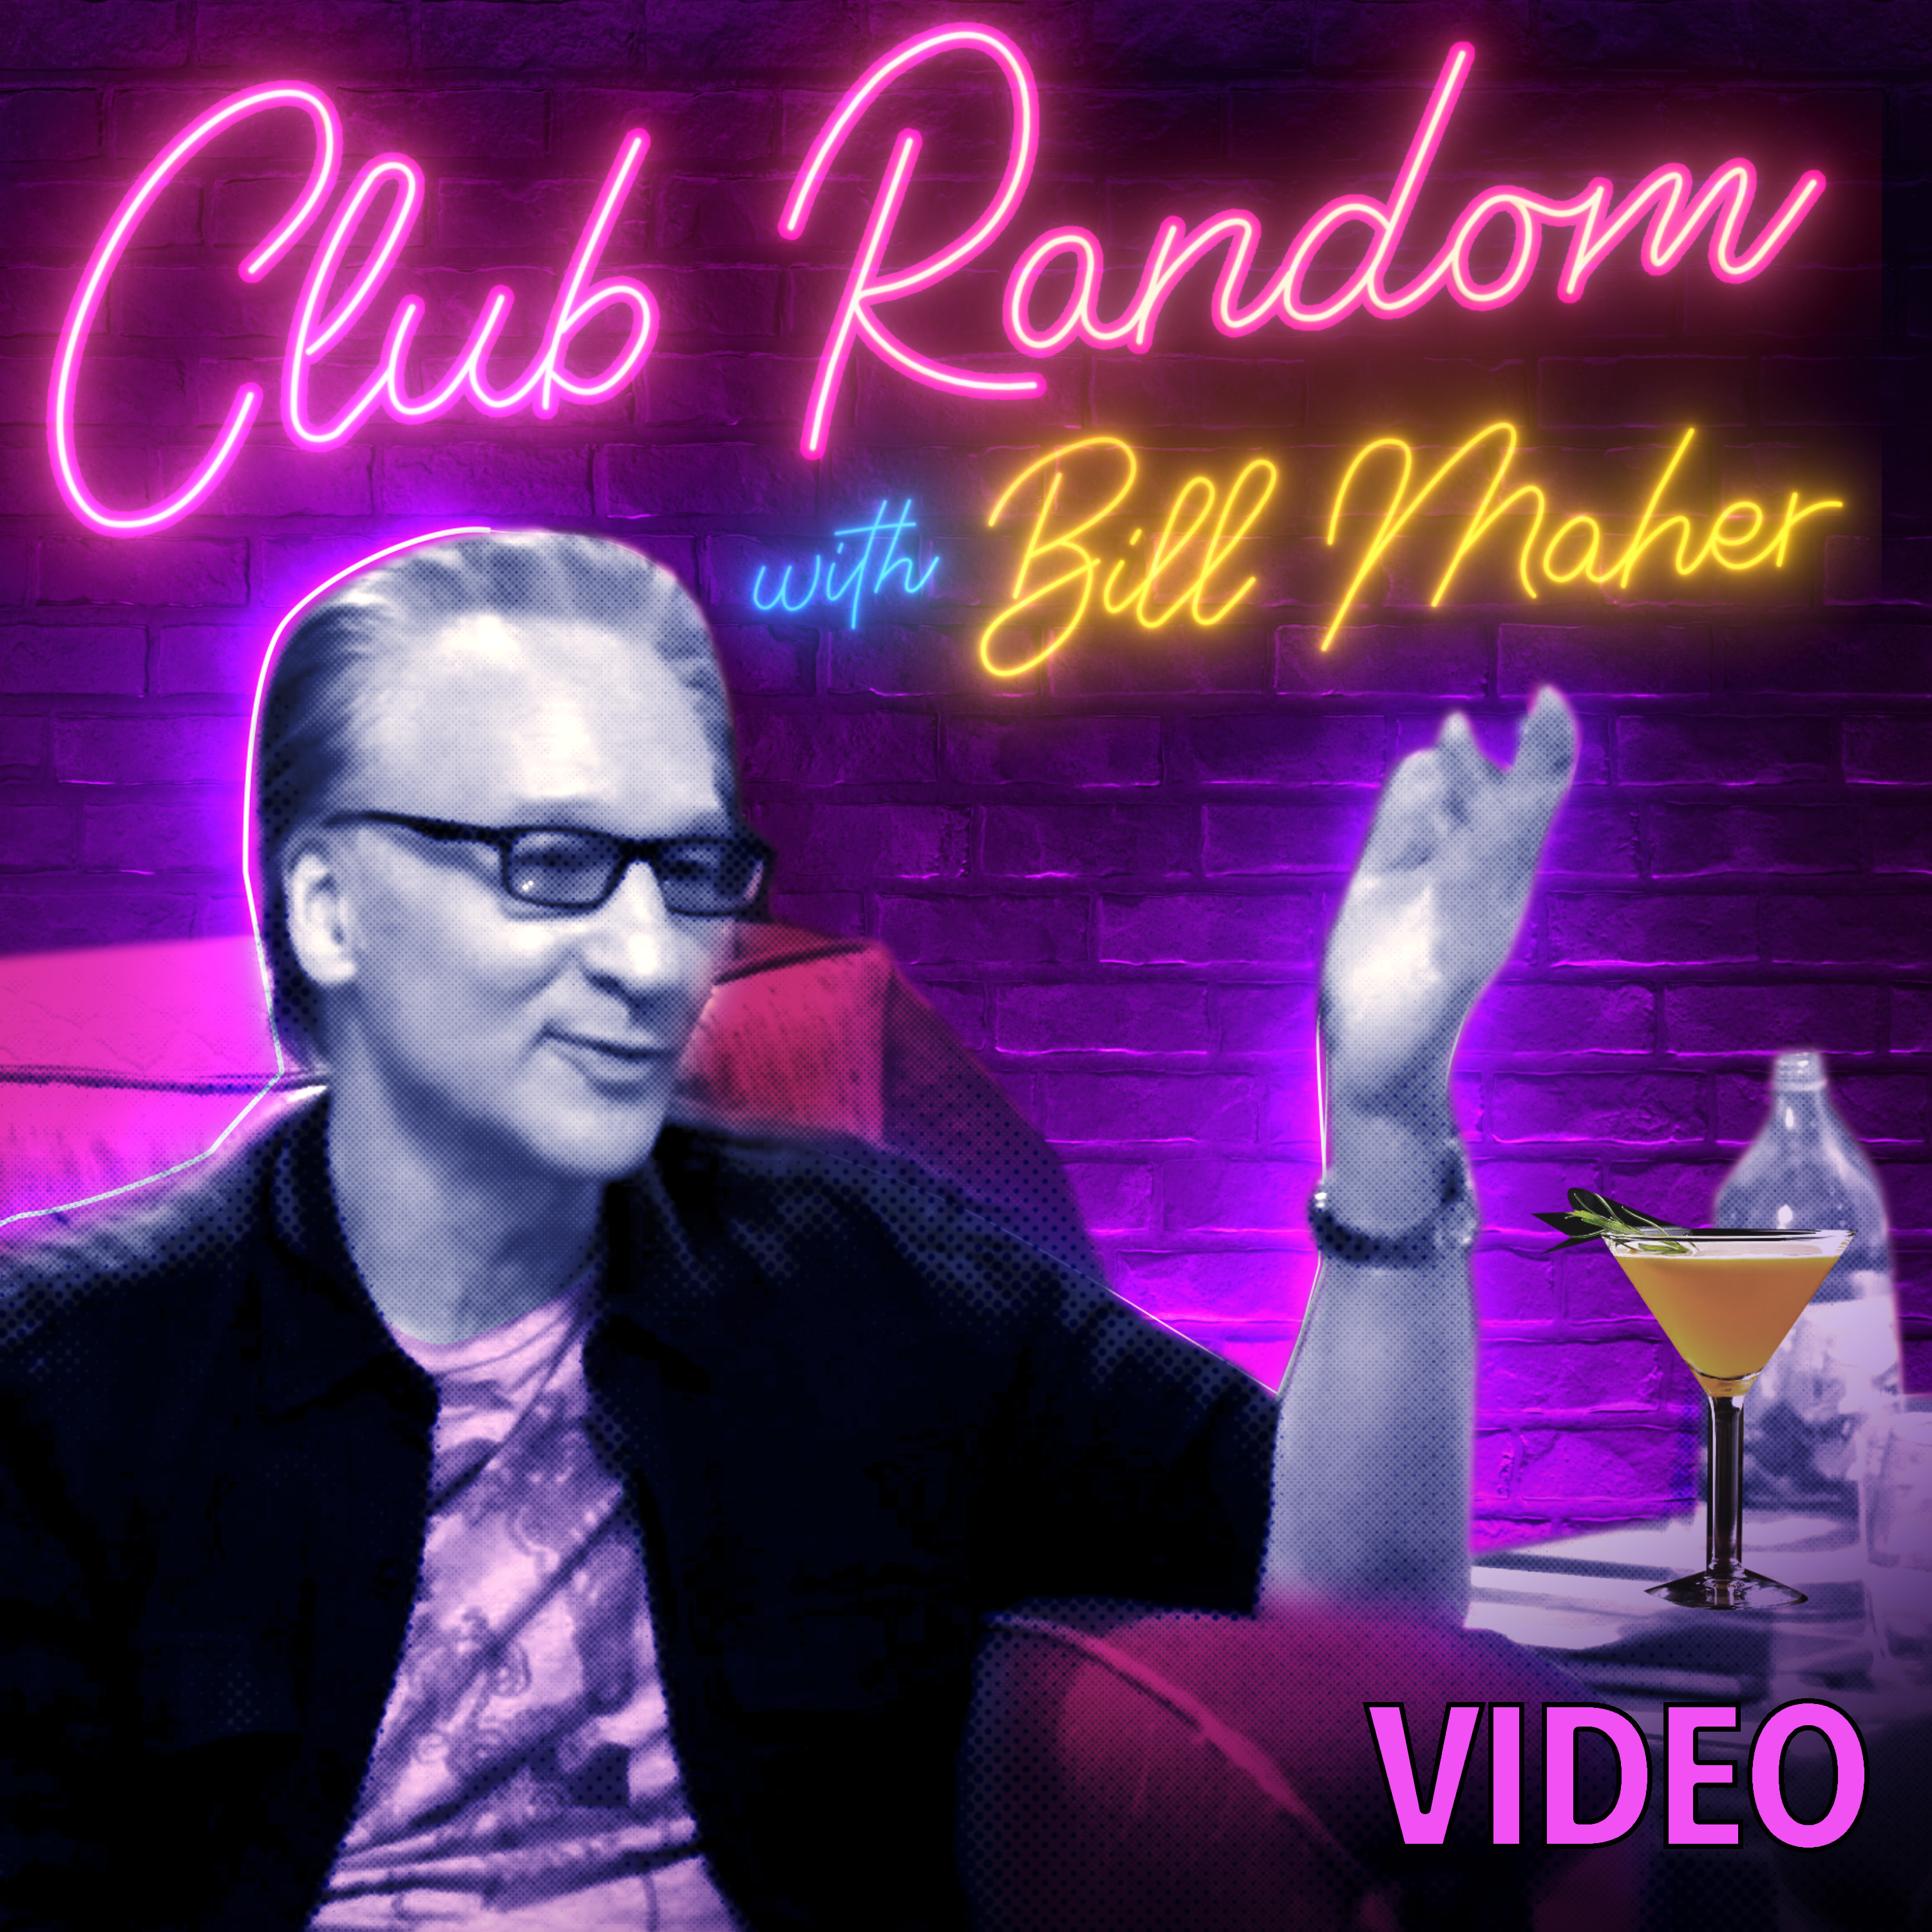 Video: James Carville | Club Random with Bill Maher